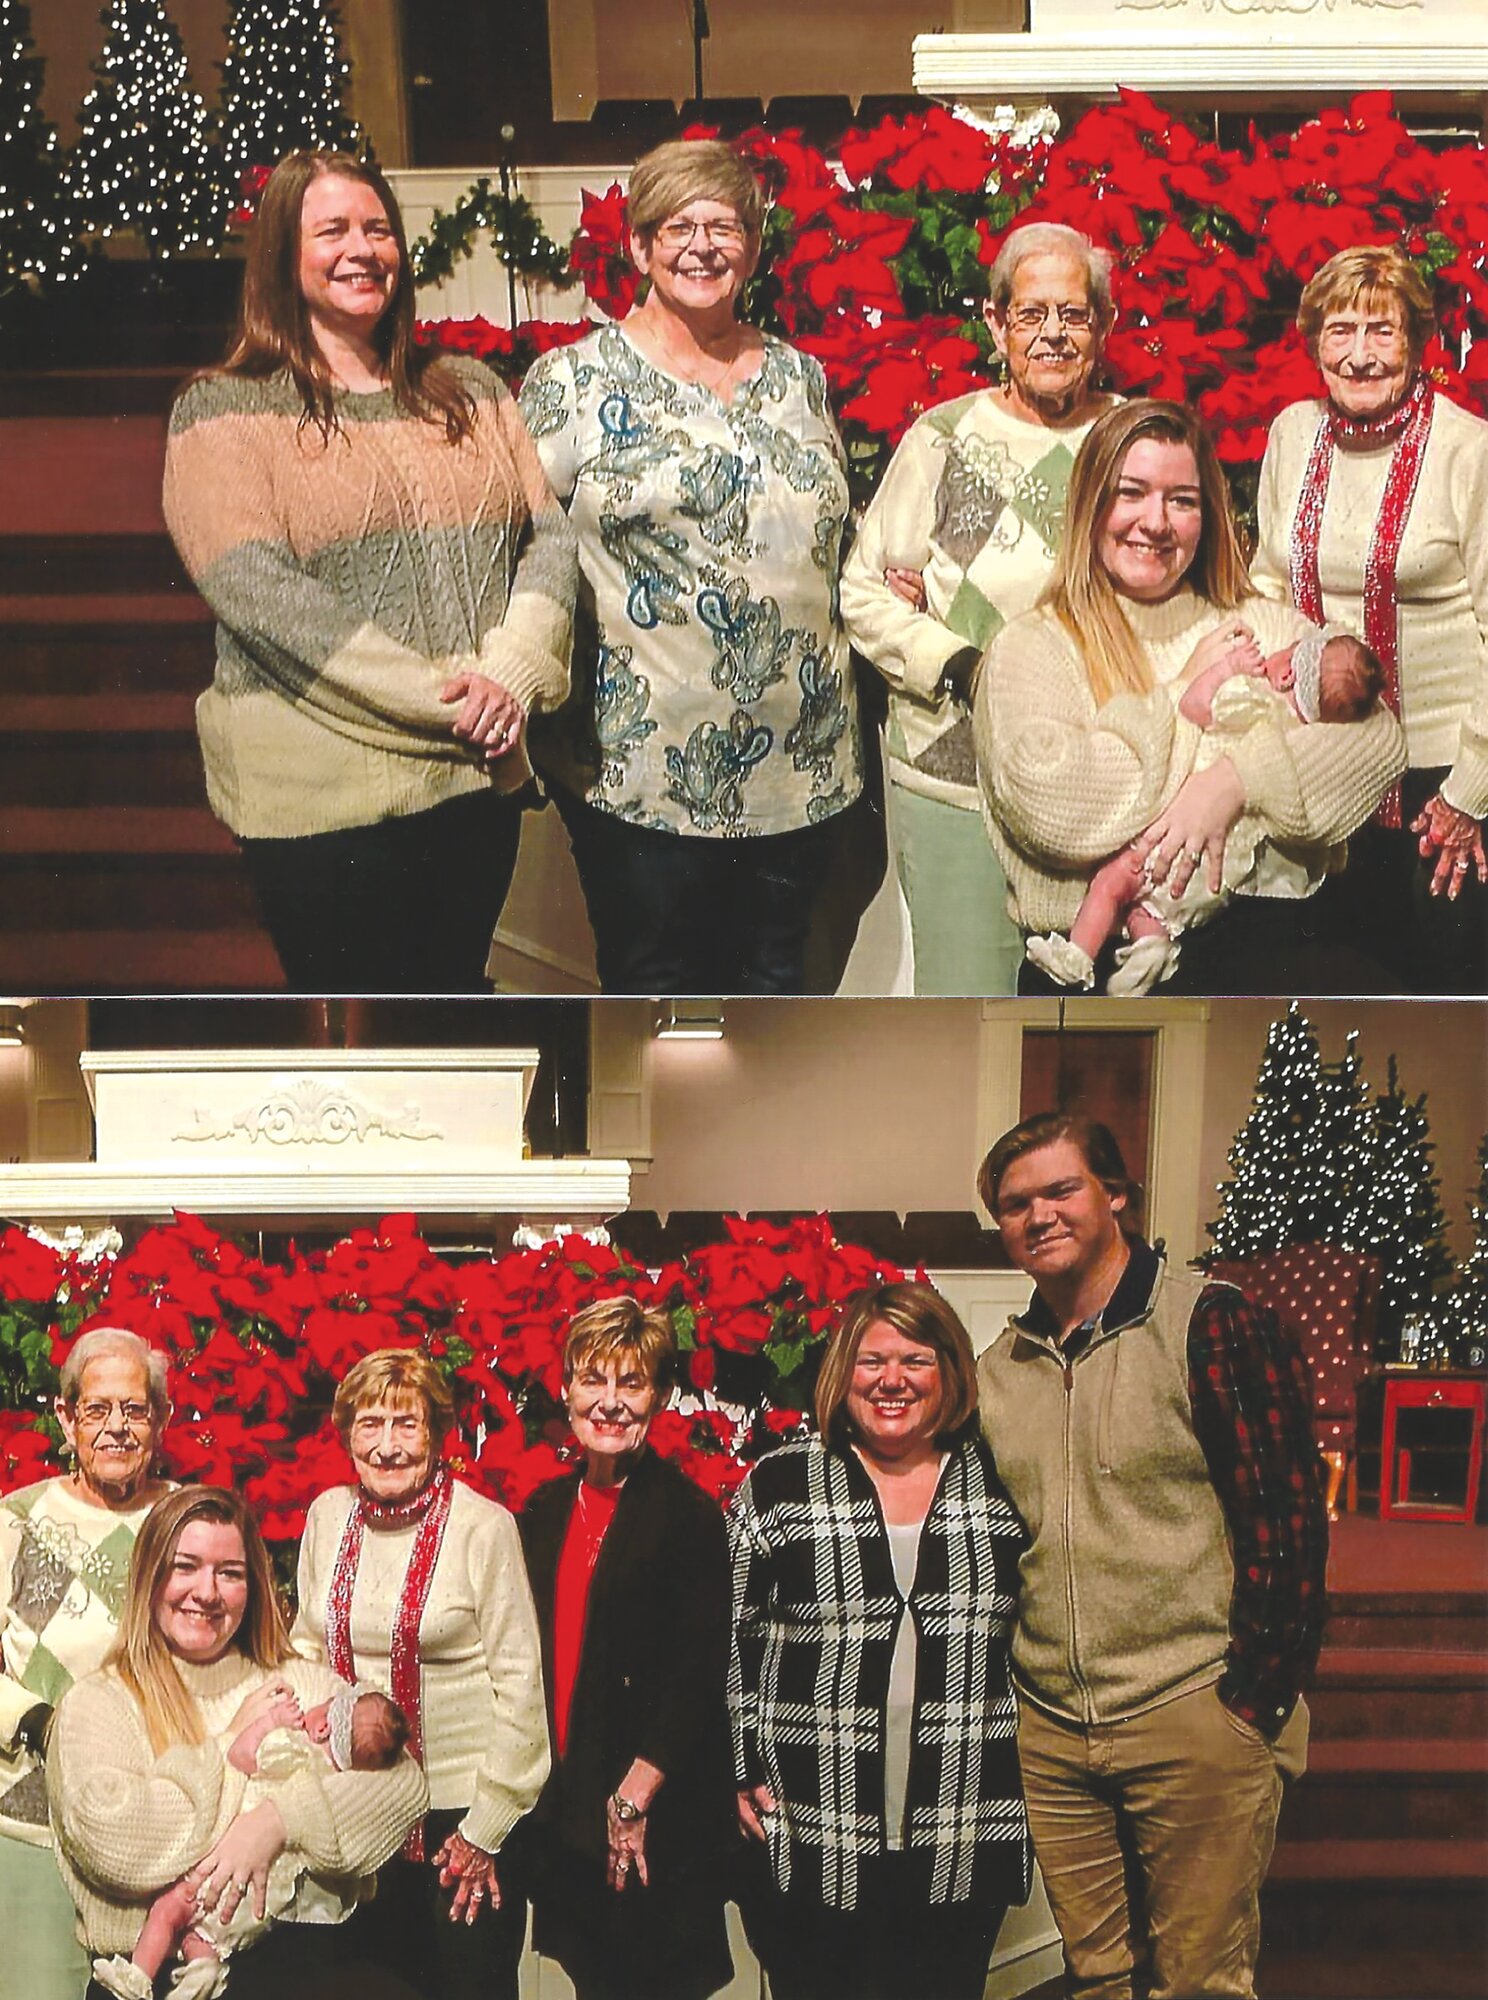 PHOTOS PROVIDED  TOP: From left: Grandmother Stephanie, great-grandmother Cathy, great-great-grandmother Sandy. Holding baby Ellie-Jane is her mother, Julie, next to great-great-grandmother Dona Elaine.  BELOW: Pictured left to right: Great-great-grandmother Sandy, mother Julie holding baby Ellie-Jane, great-great-grandmother Dona Elaine, great-grandmother Diana, grandmother Rebekah, and Ellie-Jane's father, Kody.